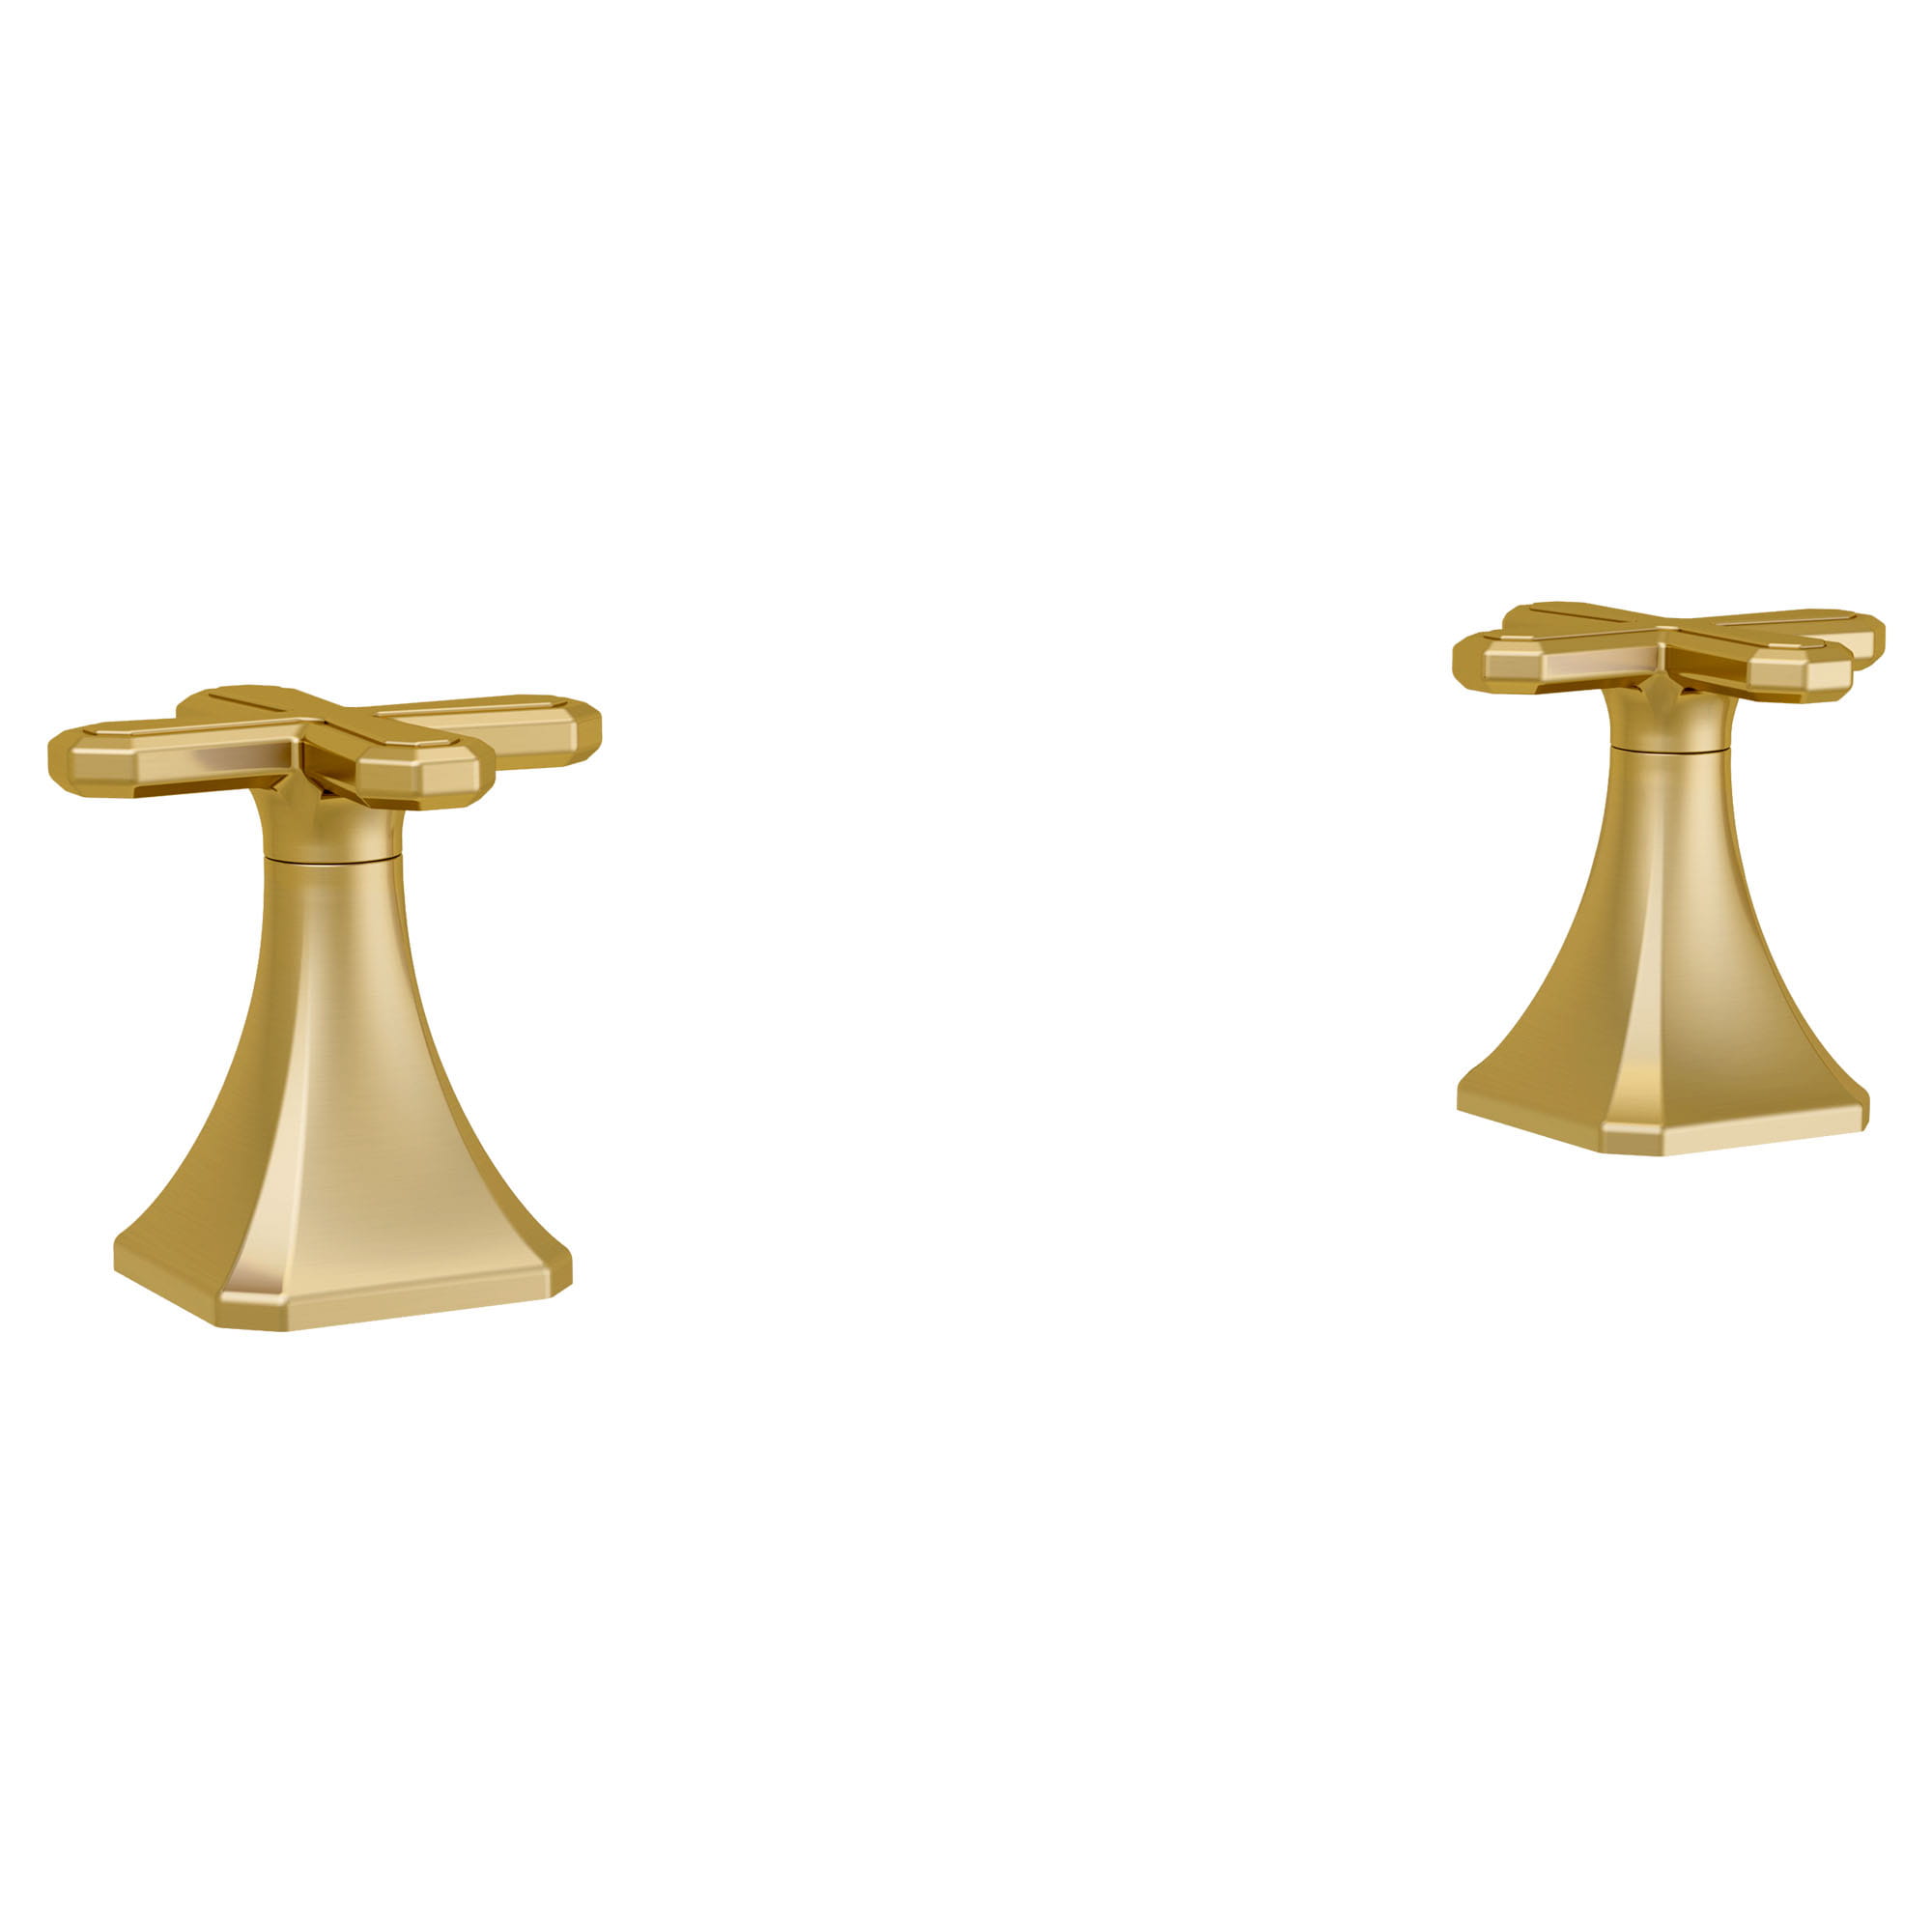 Belshire Cross Handles Only for Widespread Bathroom Faucet